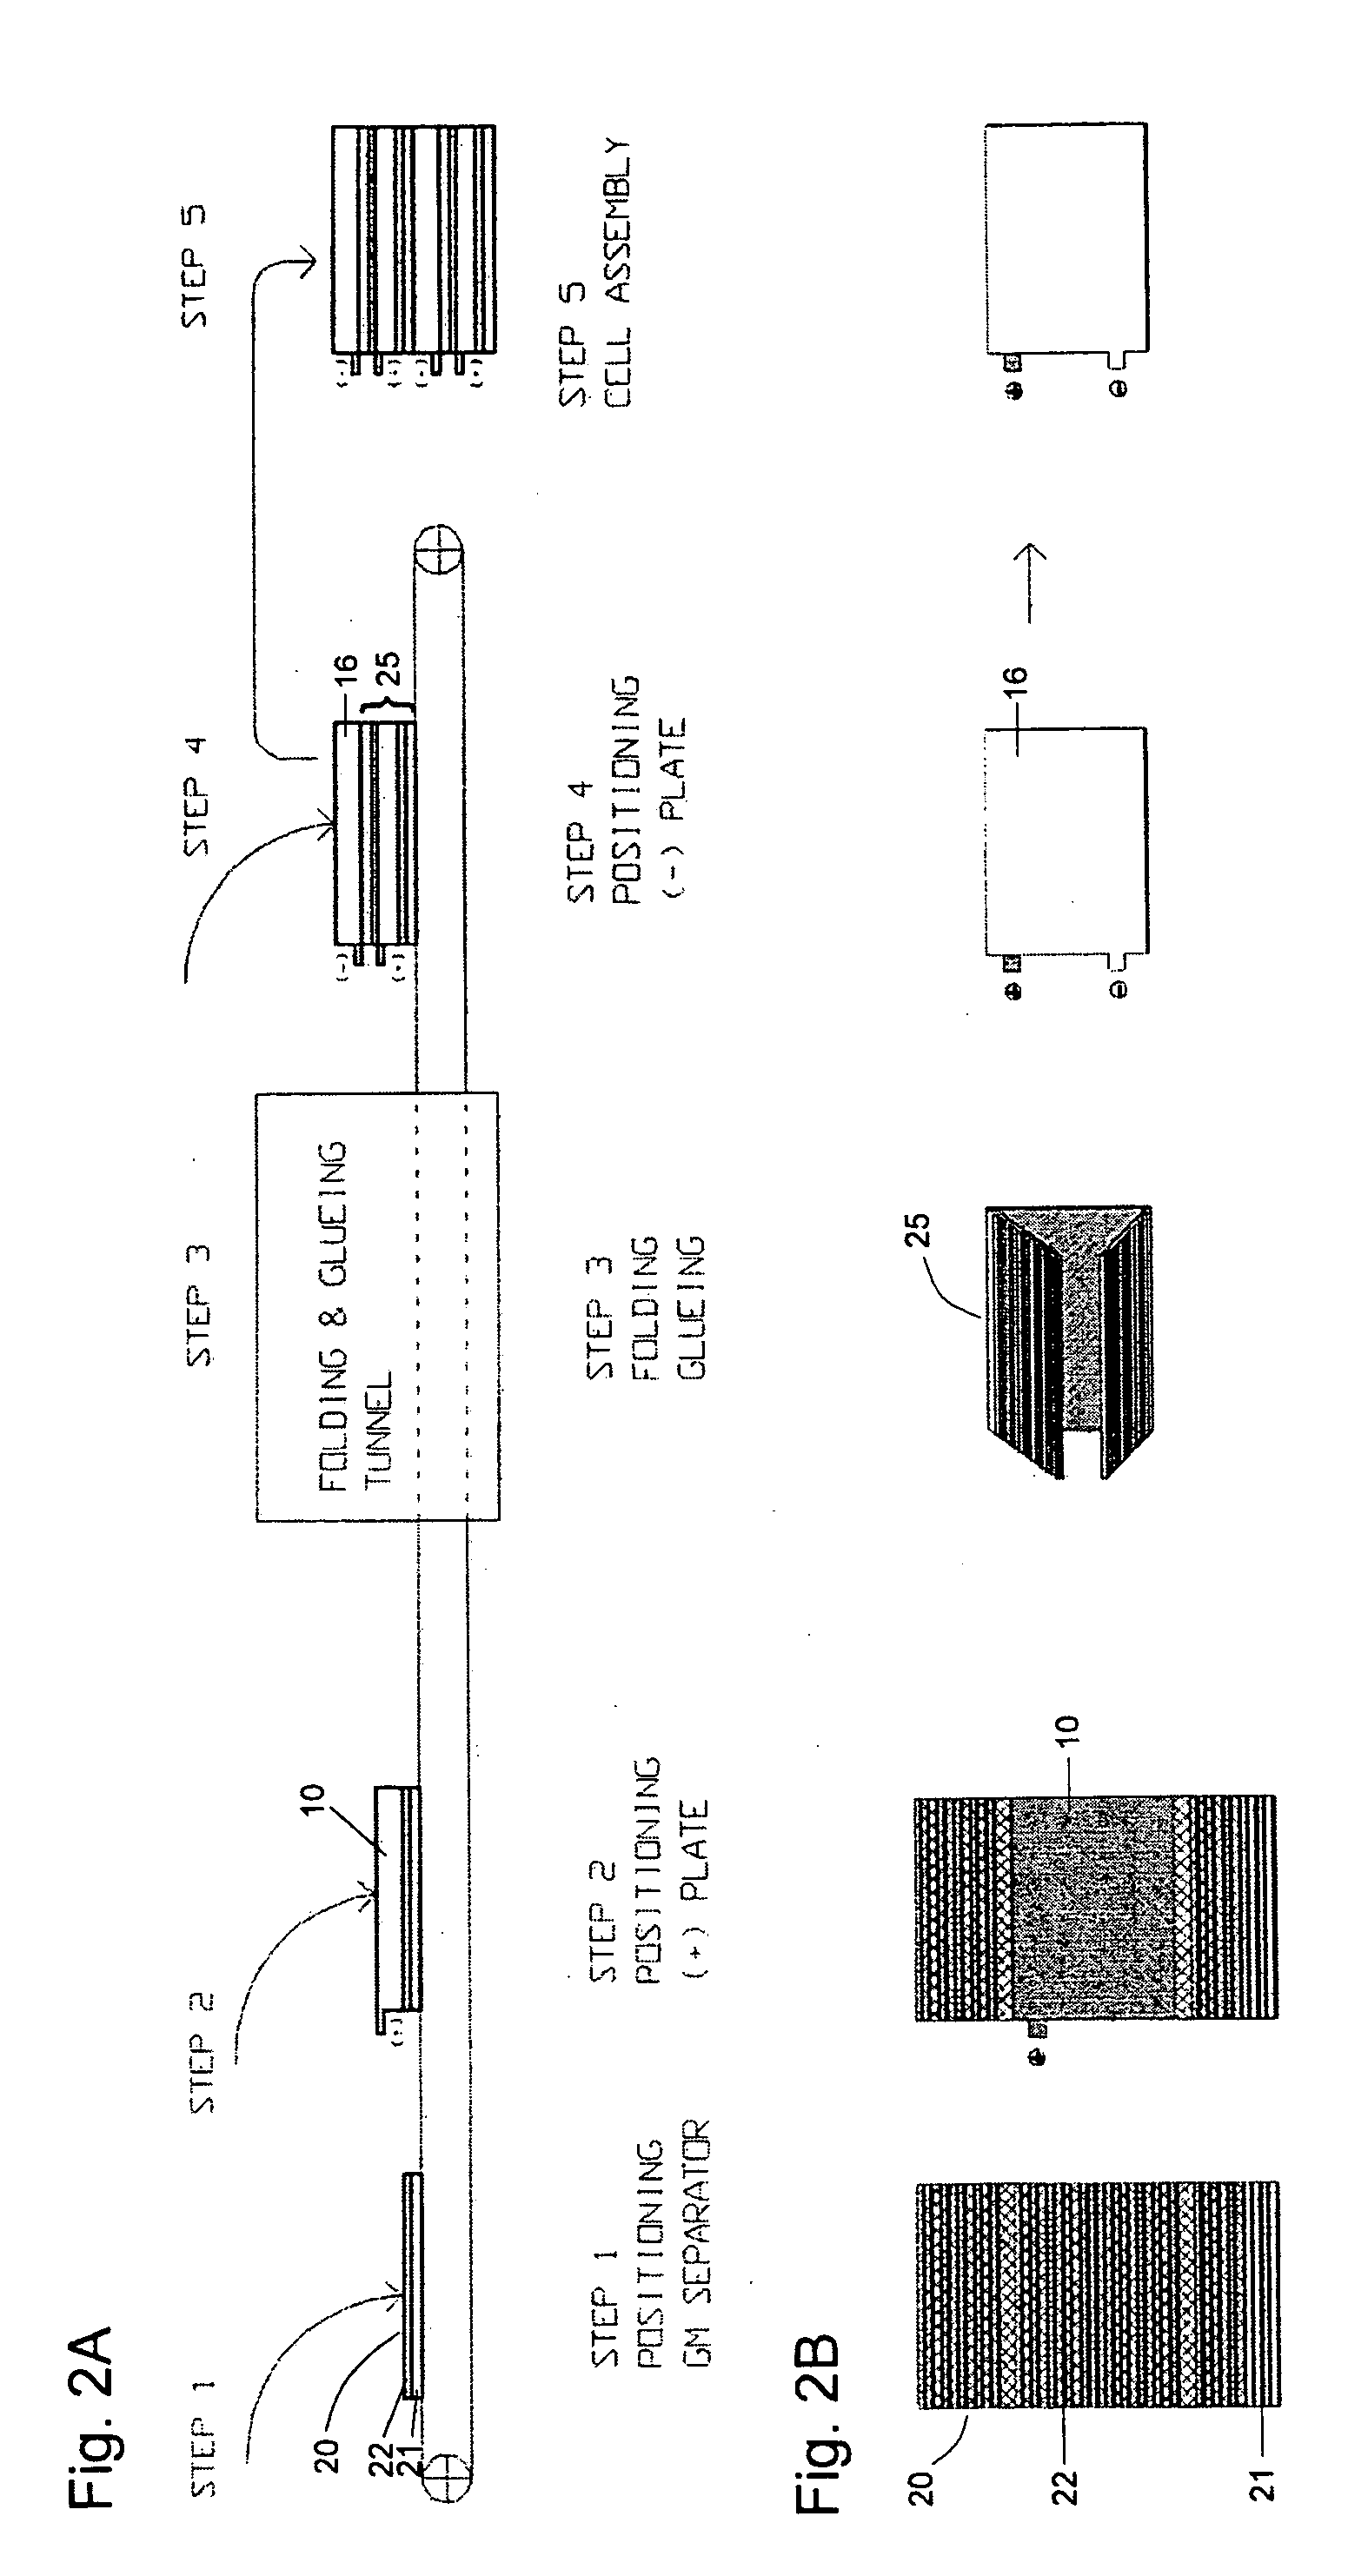 Process for manufacturing plate electrode stackings